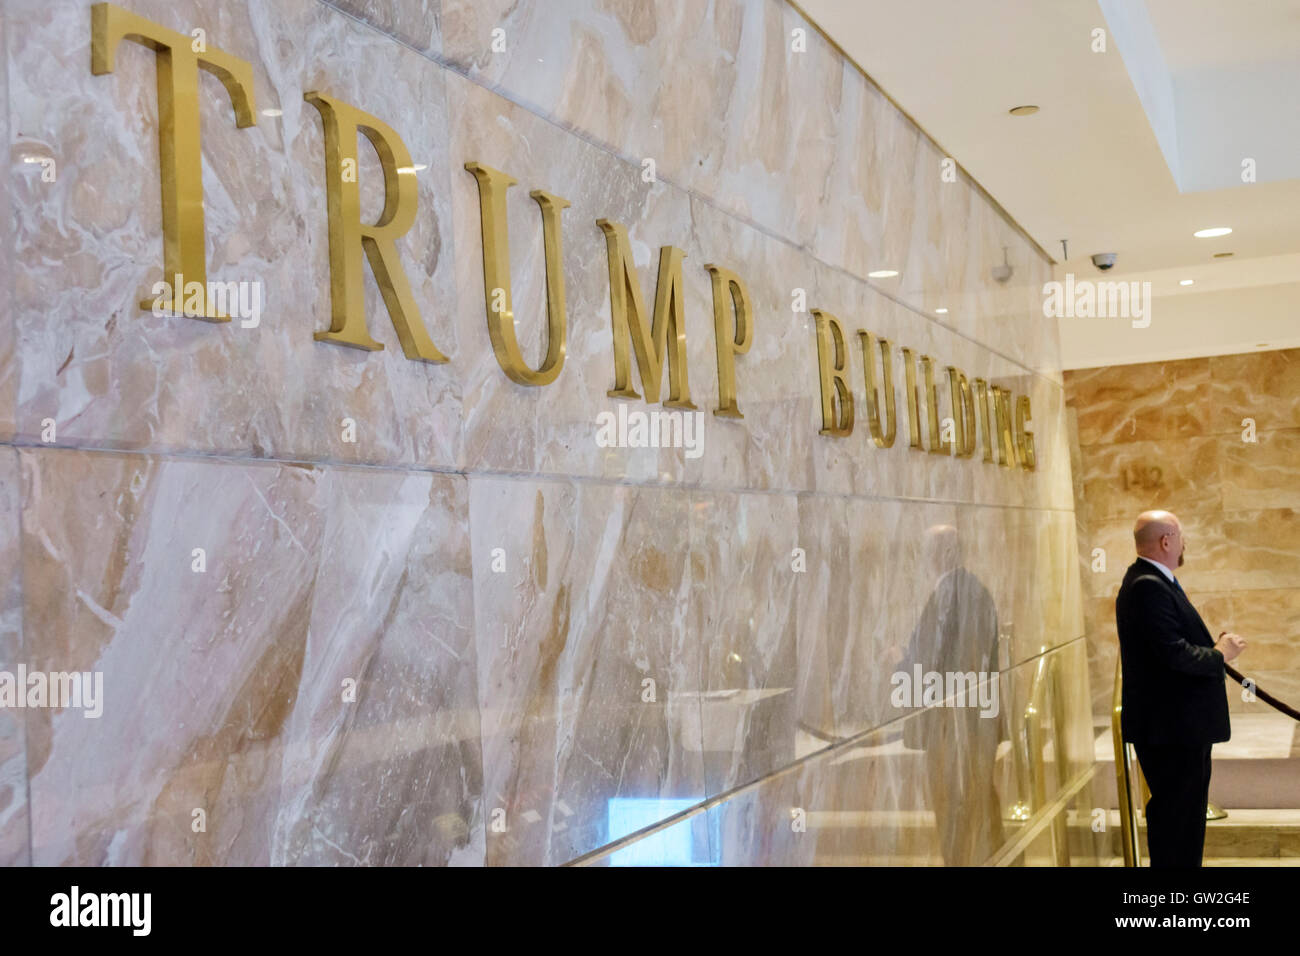 New York City,NY NYC Lower Manhattan,Financial District,Wall Street,Trump building,lobby,security guard,marble,sign,NY160716075 Stock Photo